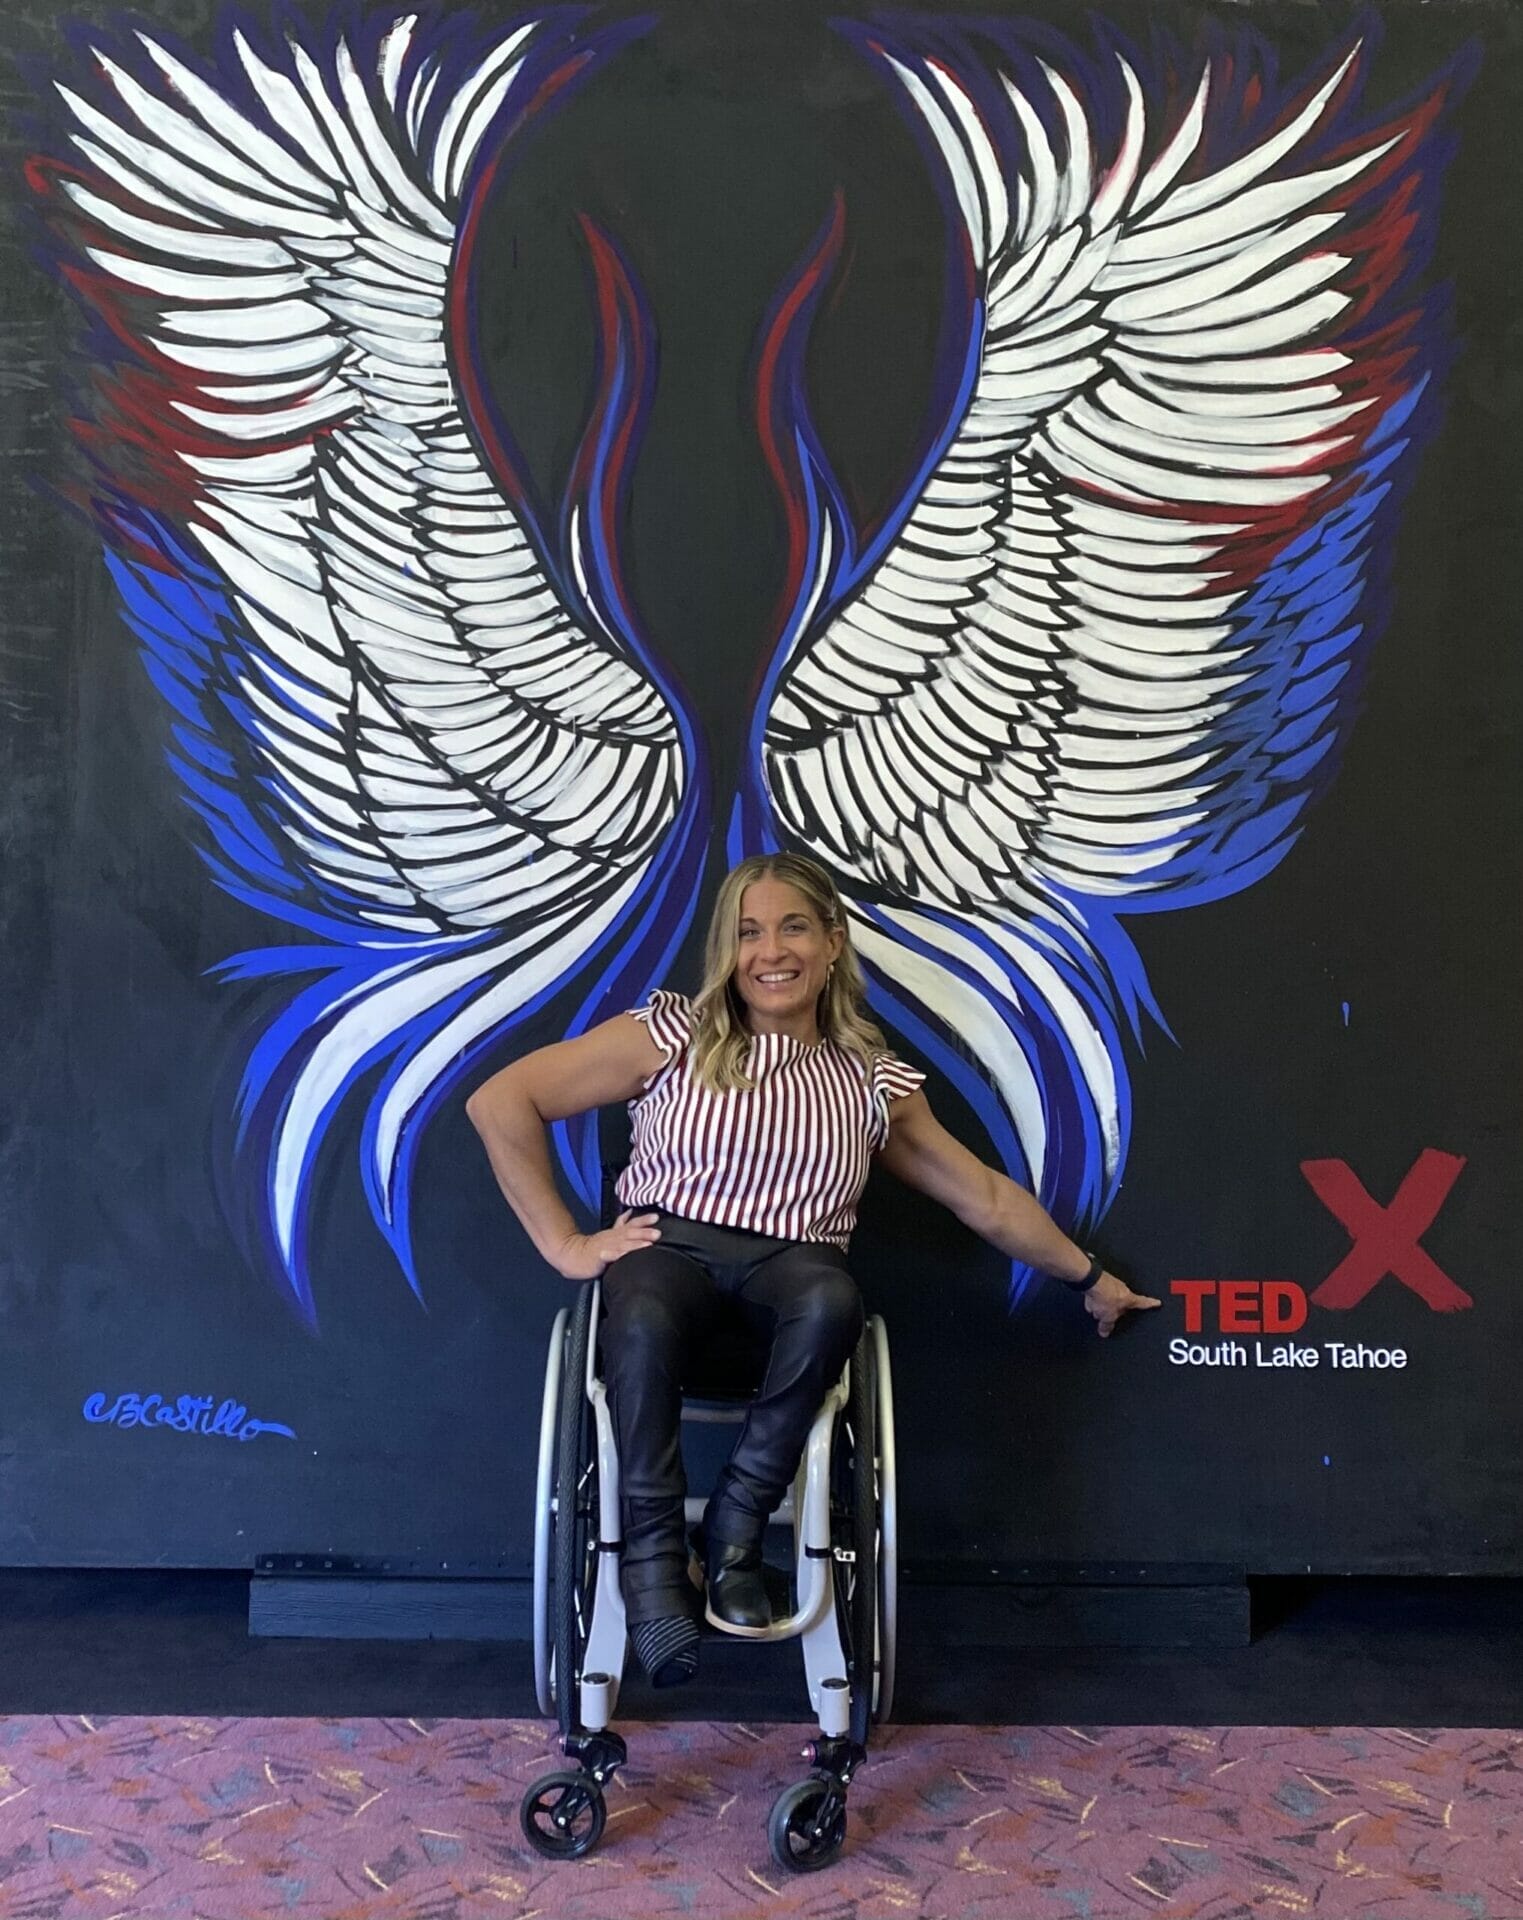 alycia in front of a wings painting in south lake tahoe pointing at tedx logo